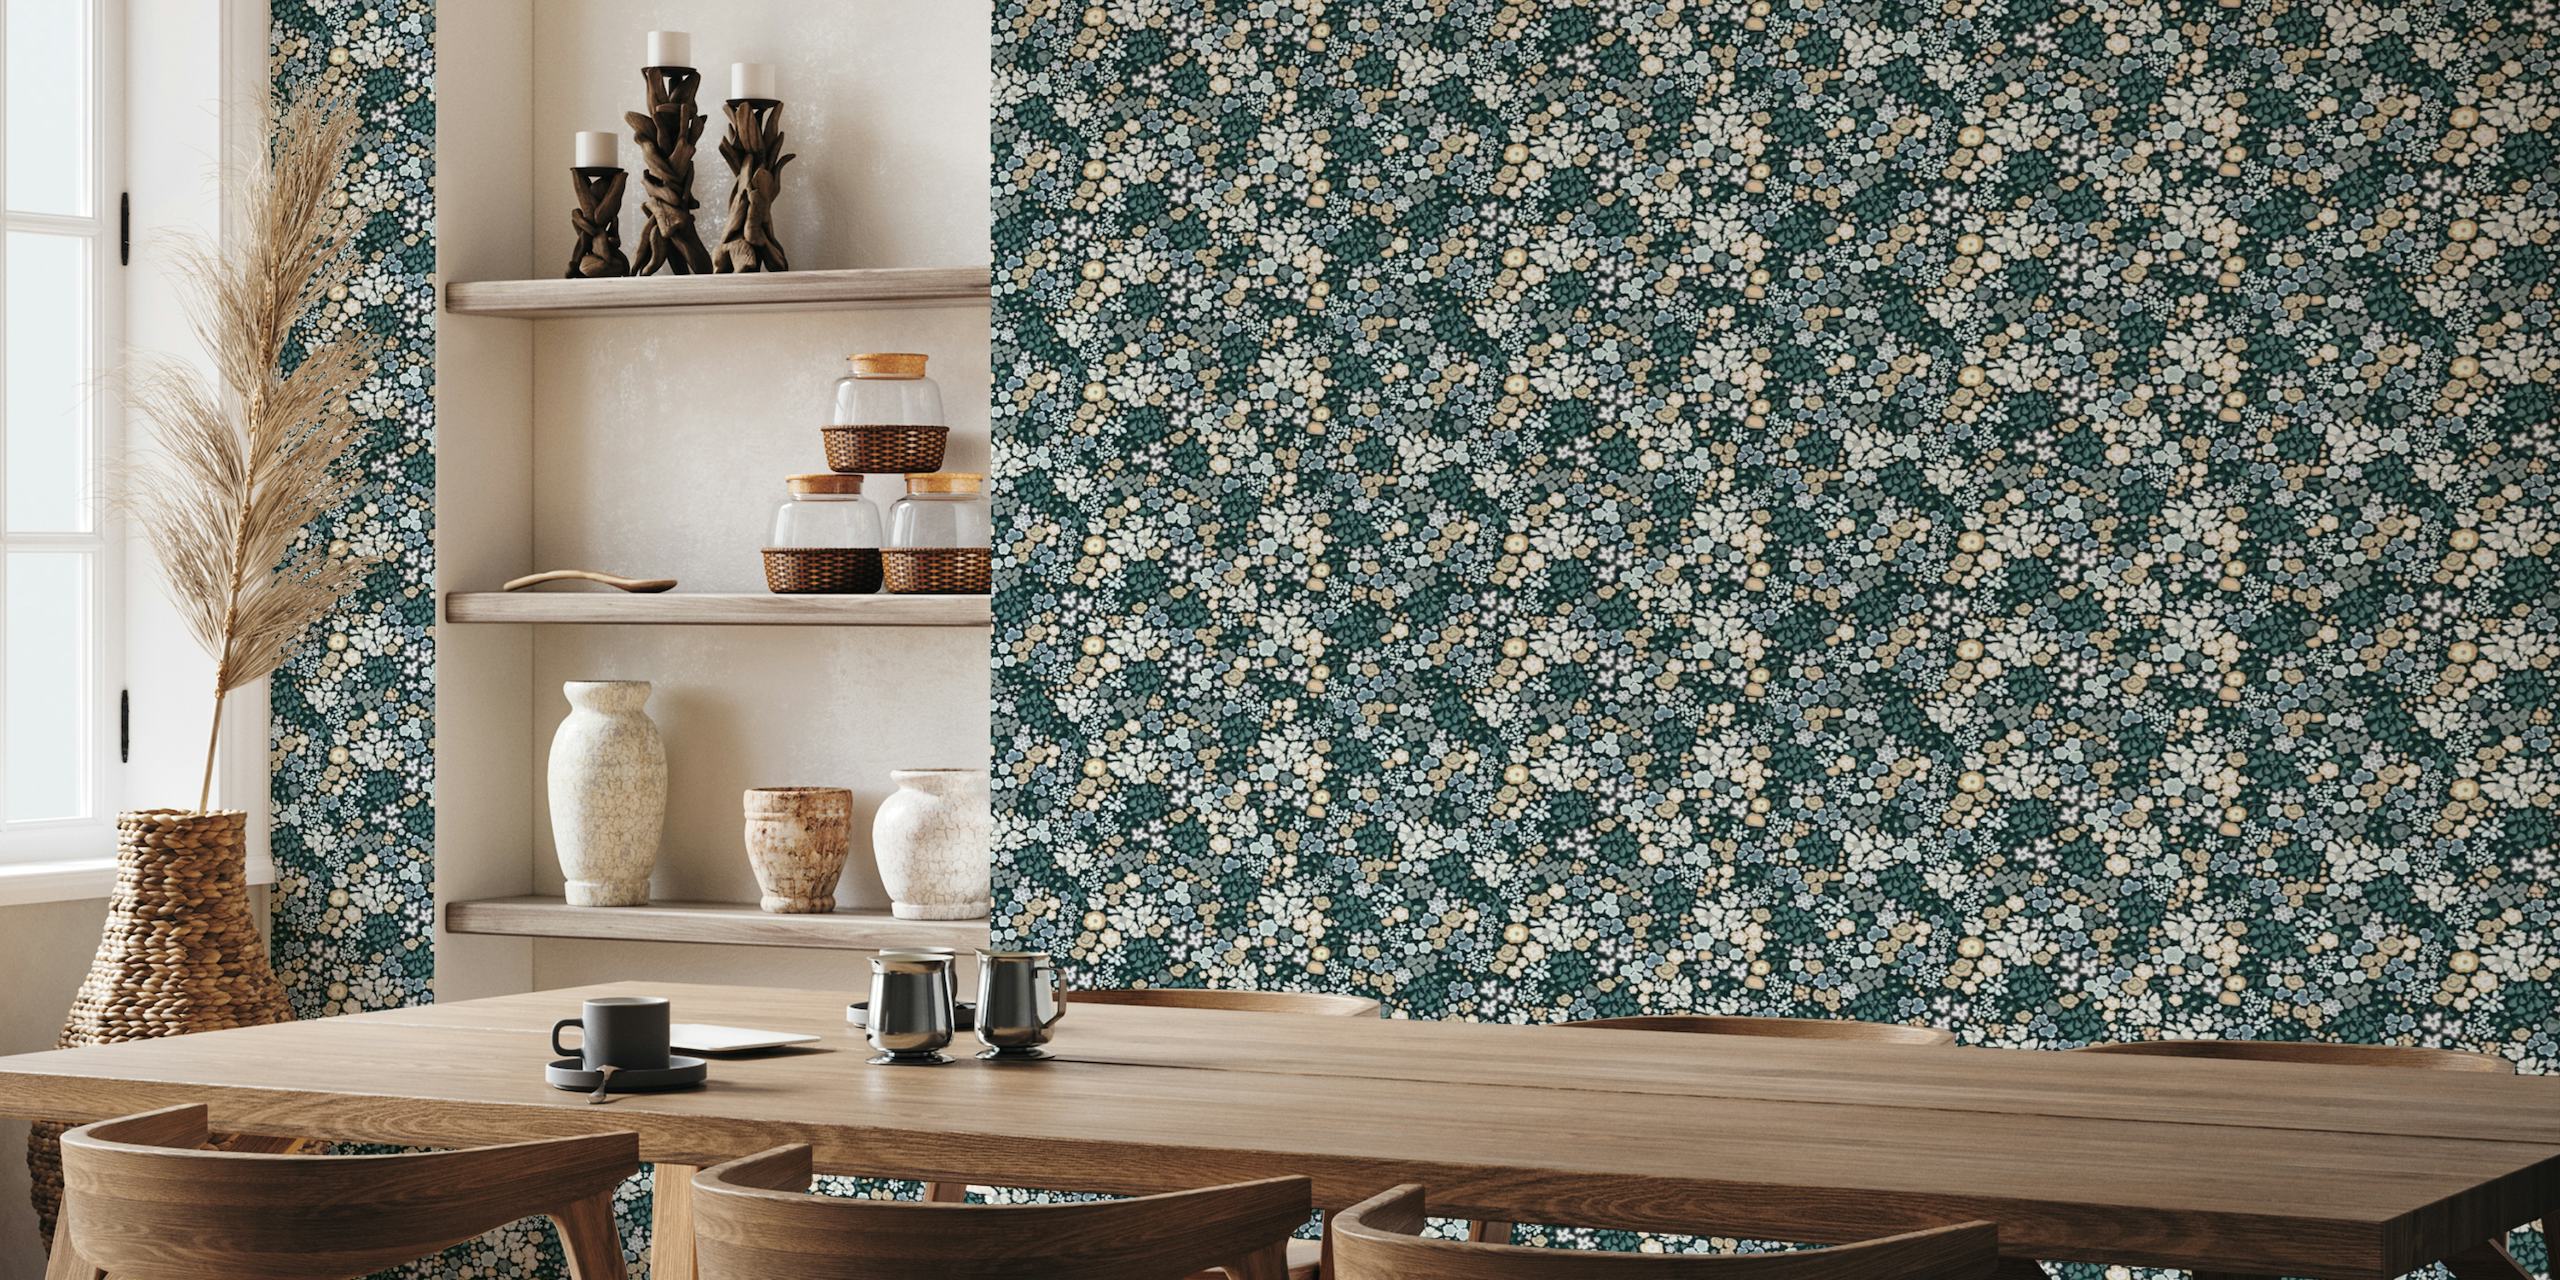 Cute small scale ditsy pattern wallpaper